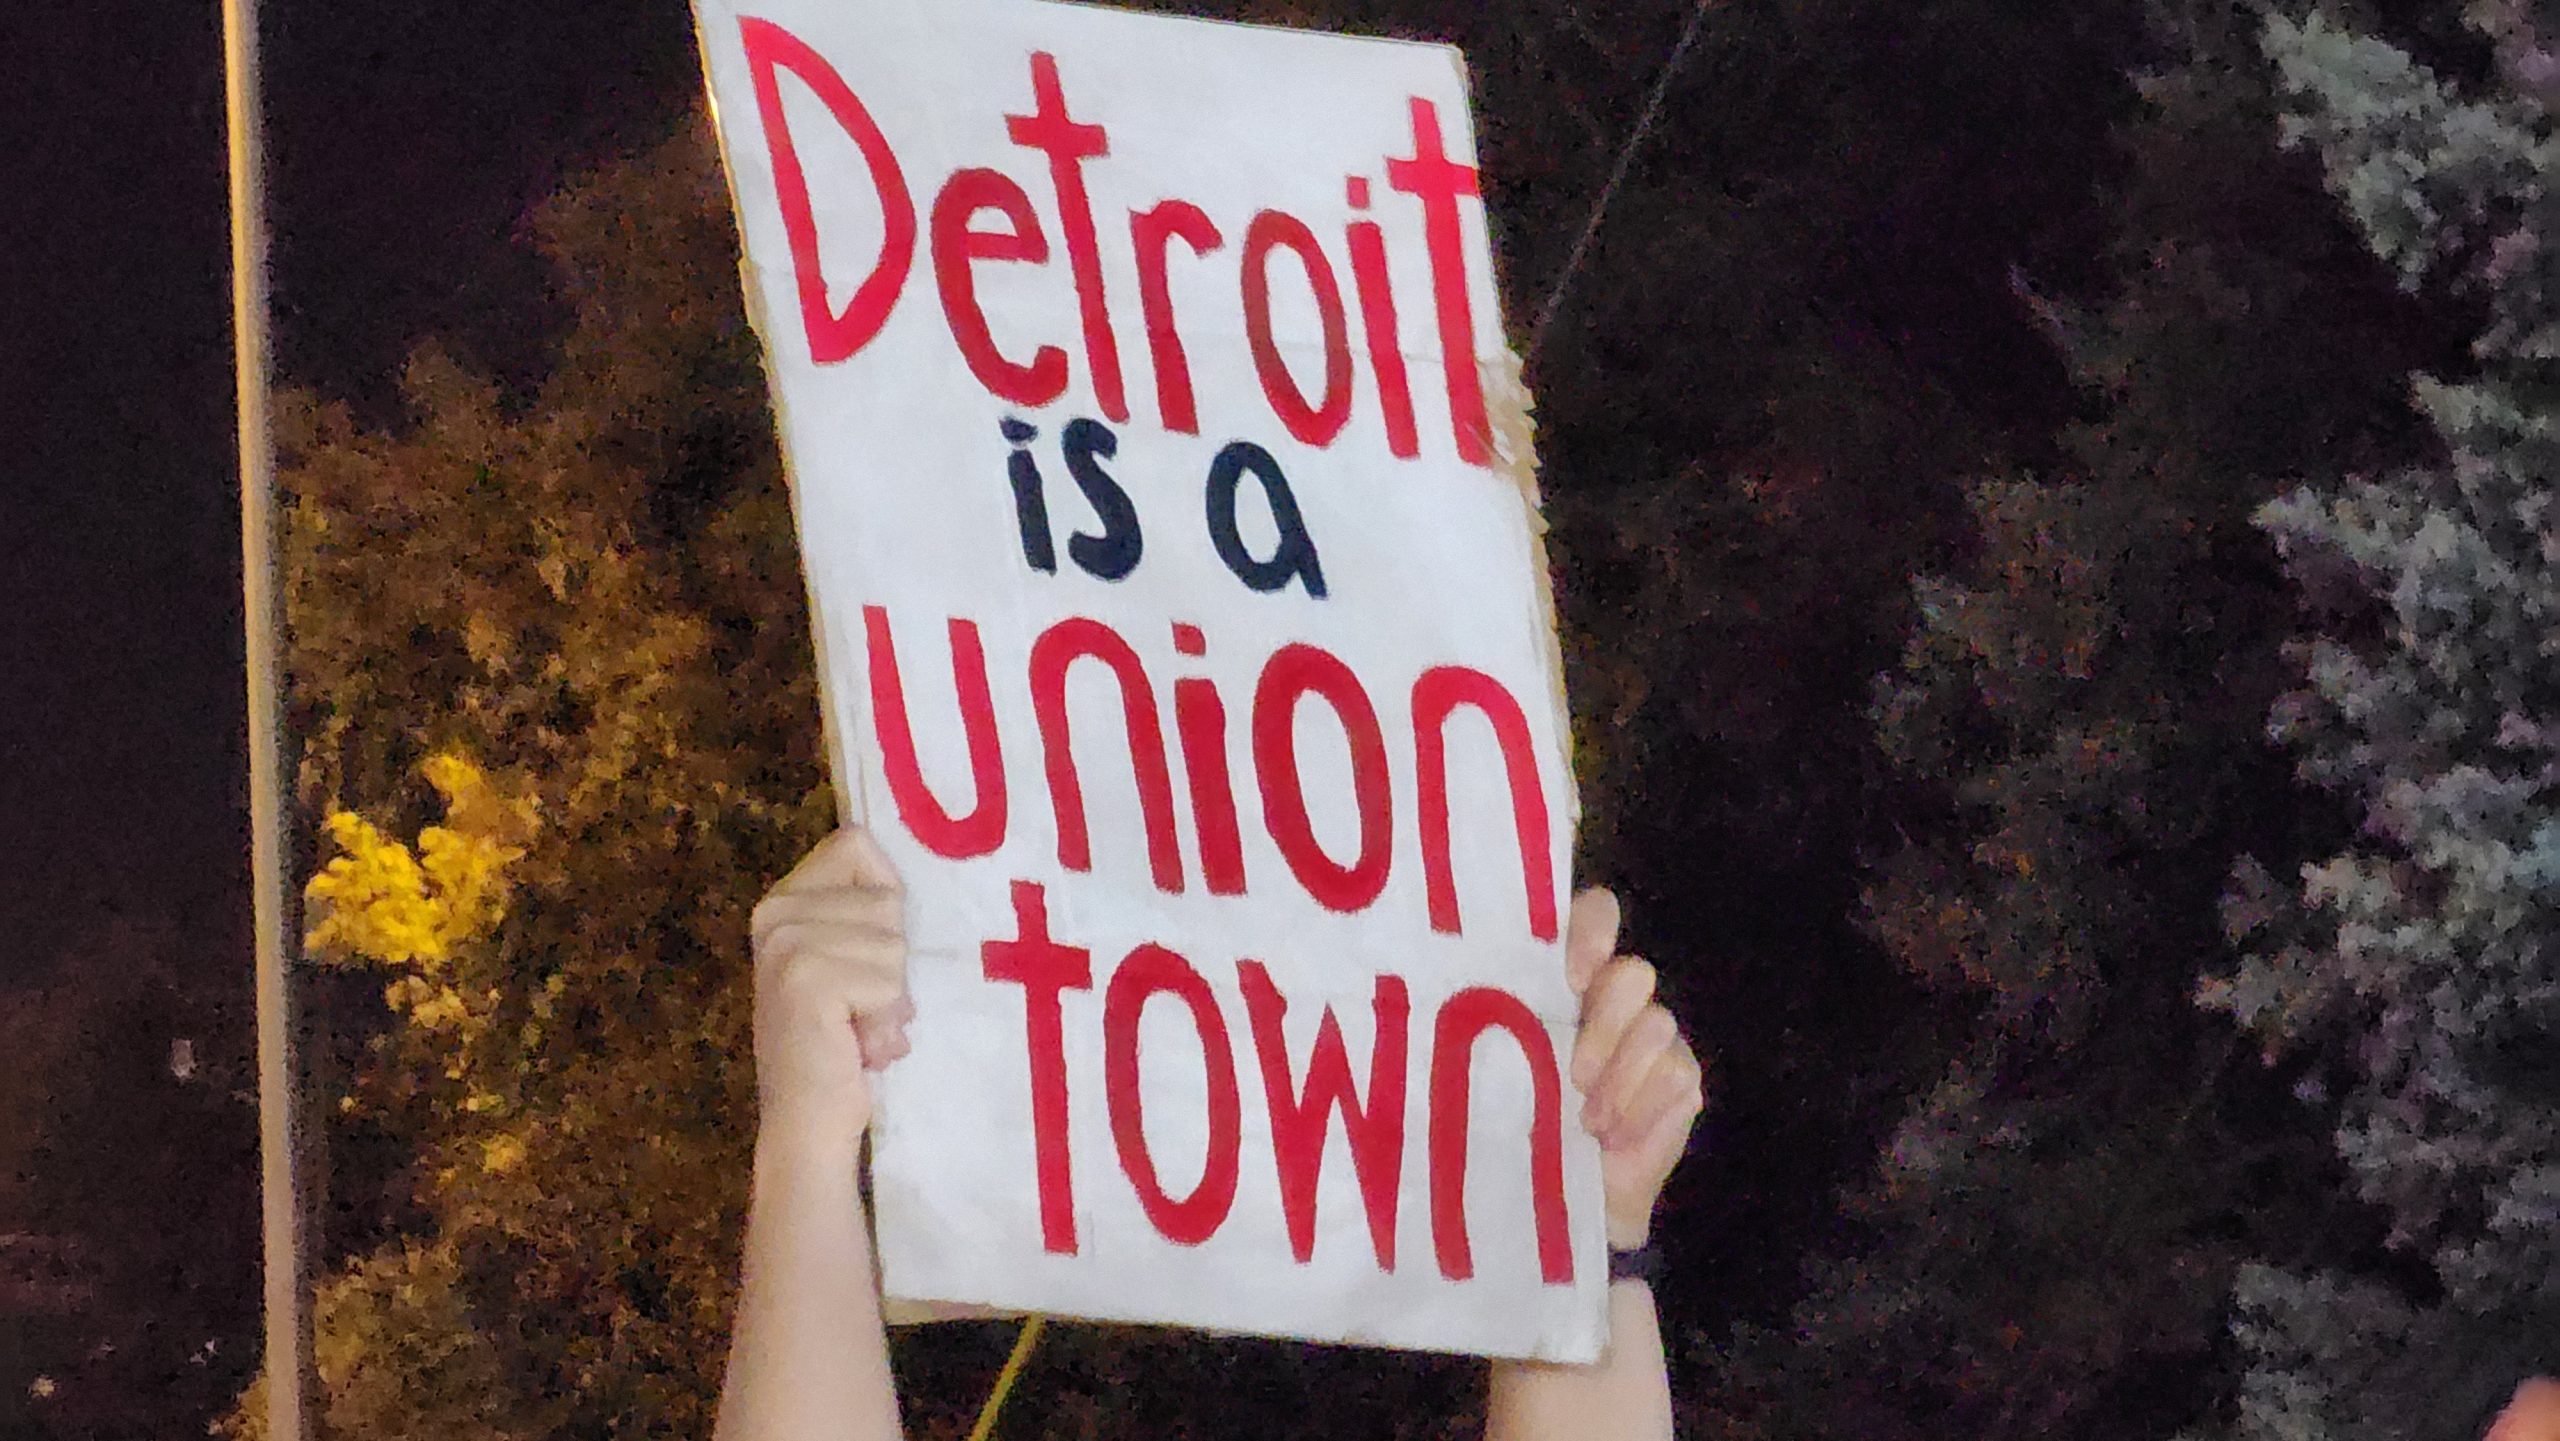 A person holds up a sign that says "Detroit is a union town" on Sept. 15, 2023, in Wayne, Mich.